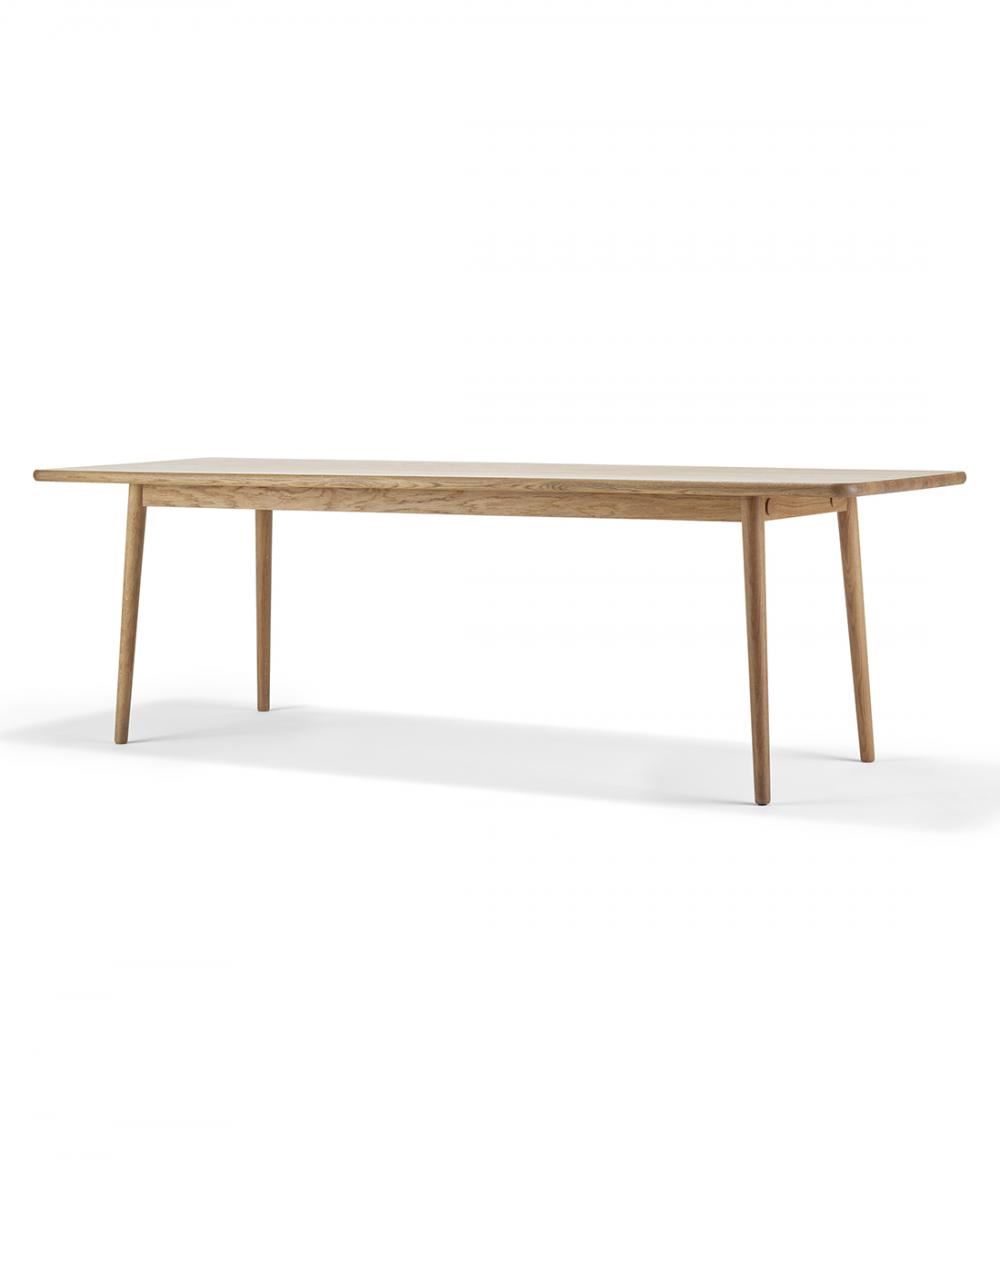 Stolab Miss Holly Table Rectangular Birch 175 X 82cm Light Wood Designer Furniture From Holloways Of Ludlow